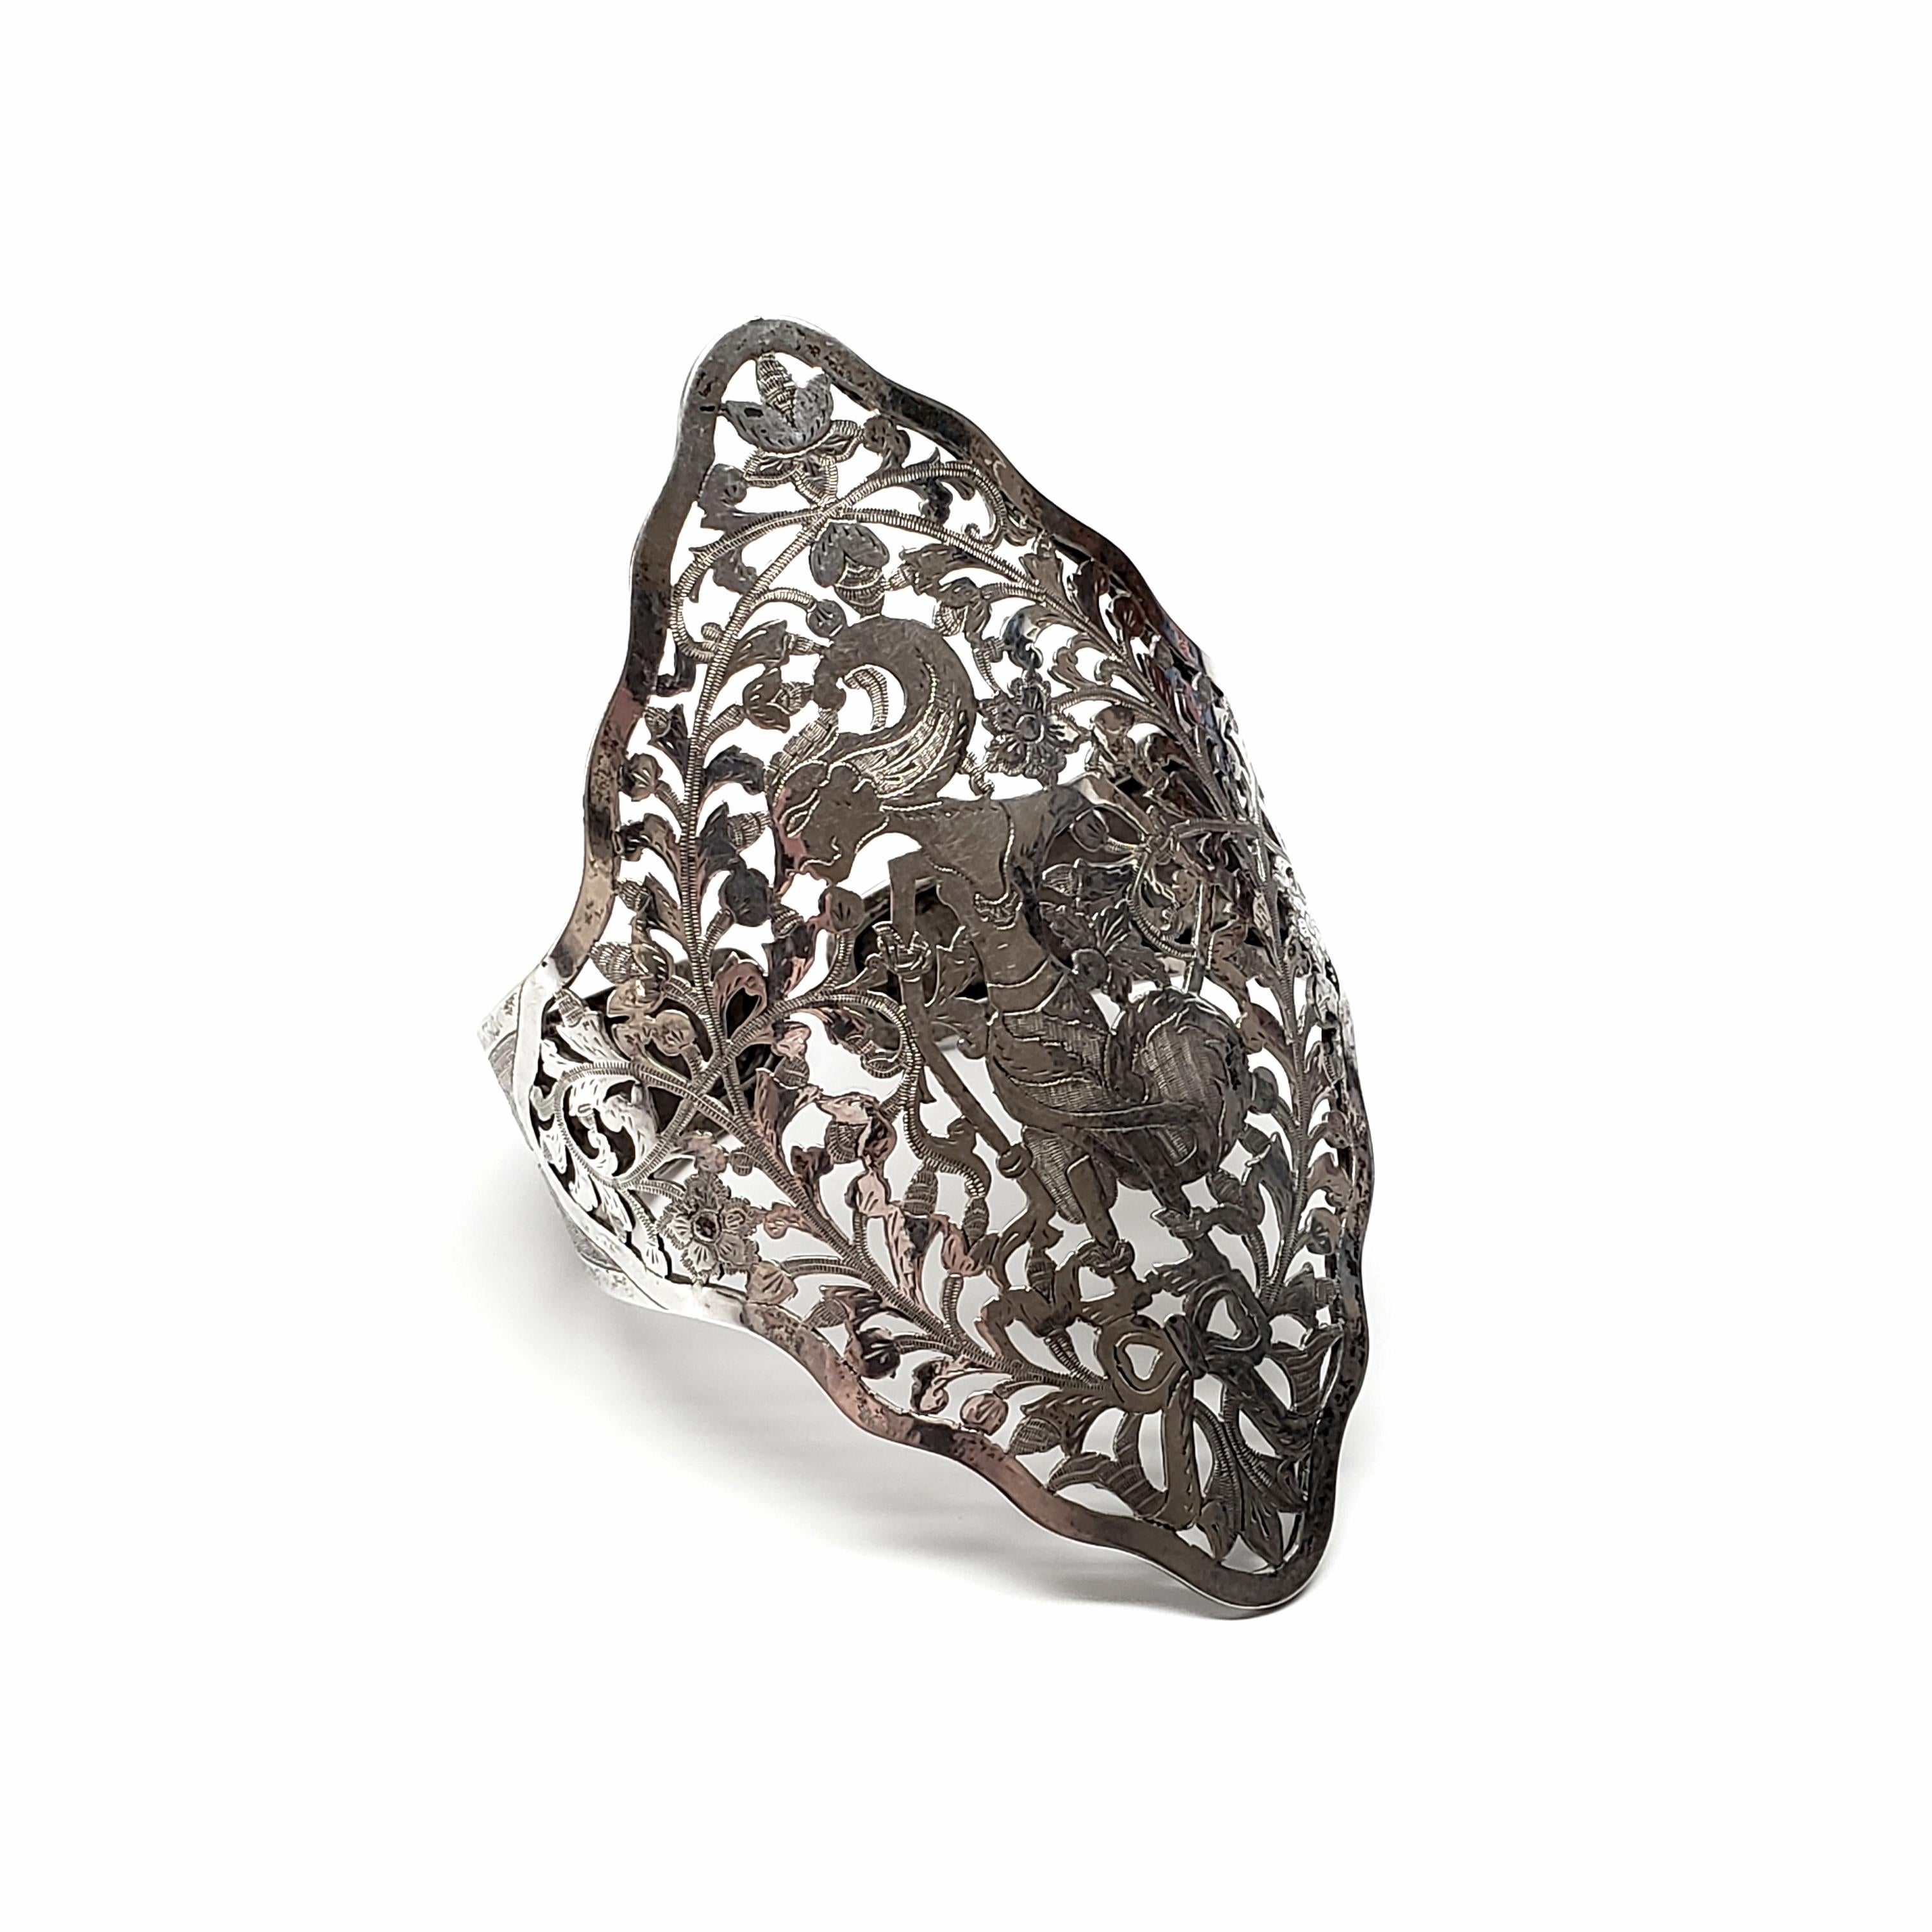 Vintage 800 silver Thai dancer cuff.

This interesting and unique piece features an ornately cut-out flower and leaf design, etched detailing and a Thai dancer at its center.

Measures approx 6 1/2